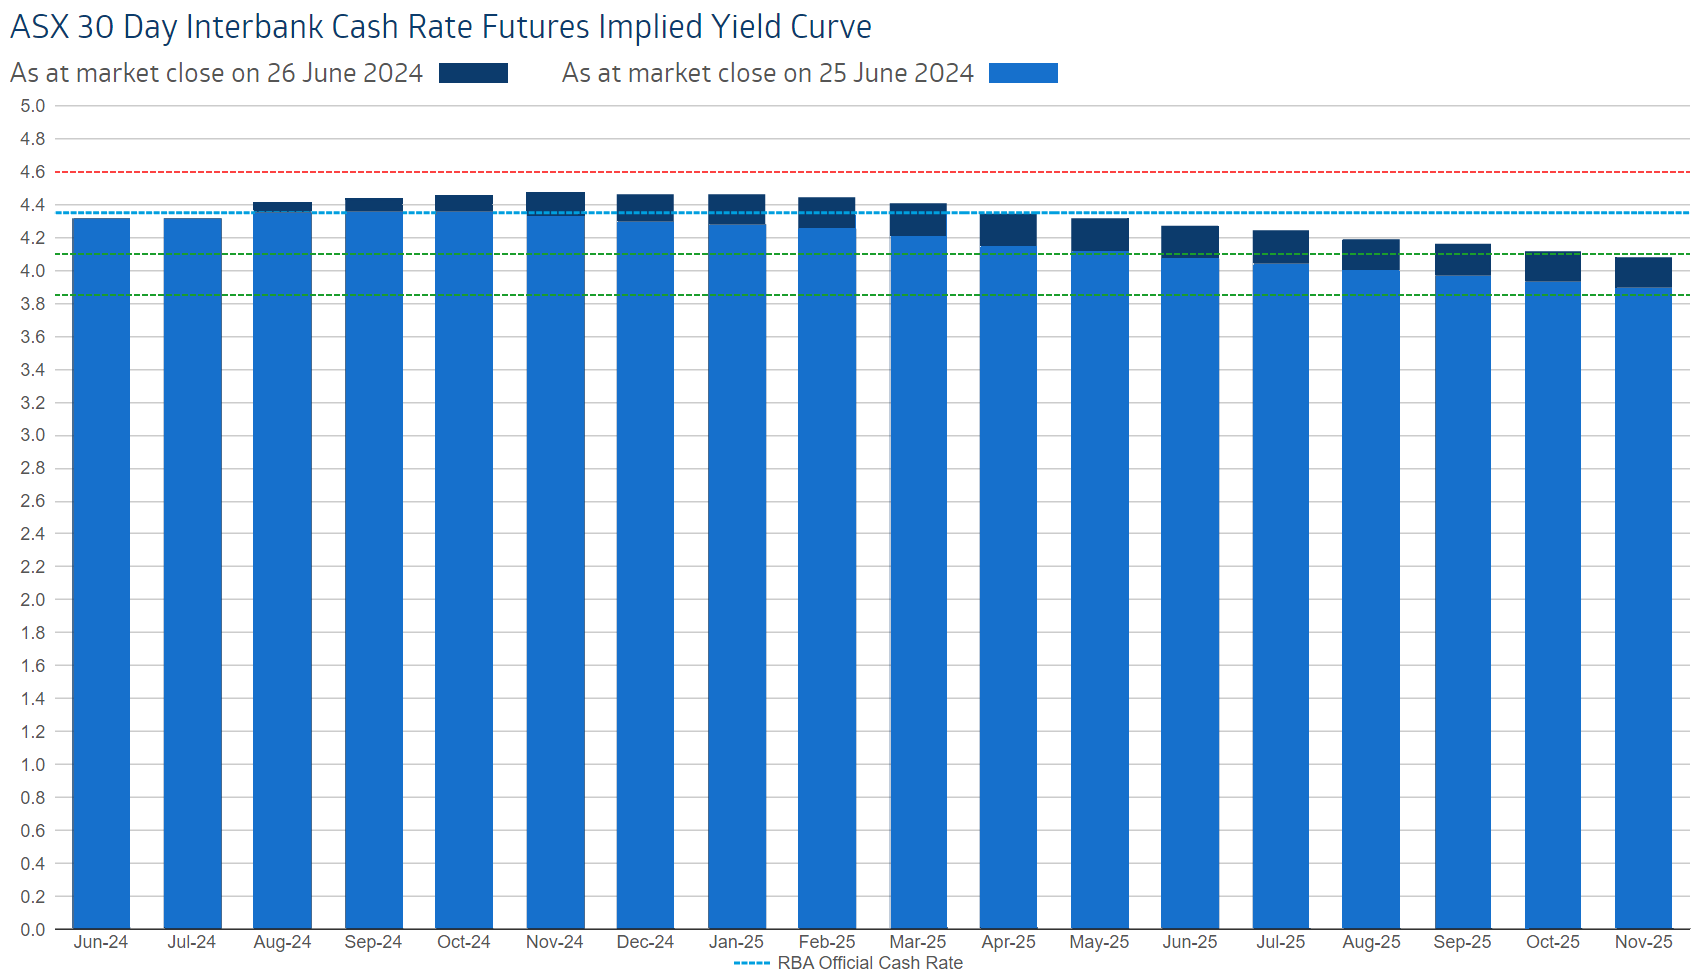 30-day cash rate futures implied yield curve. For full size image click here. Source: ASX, available here.